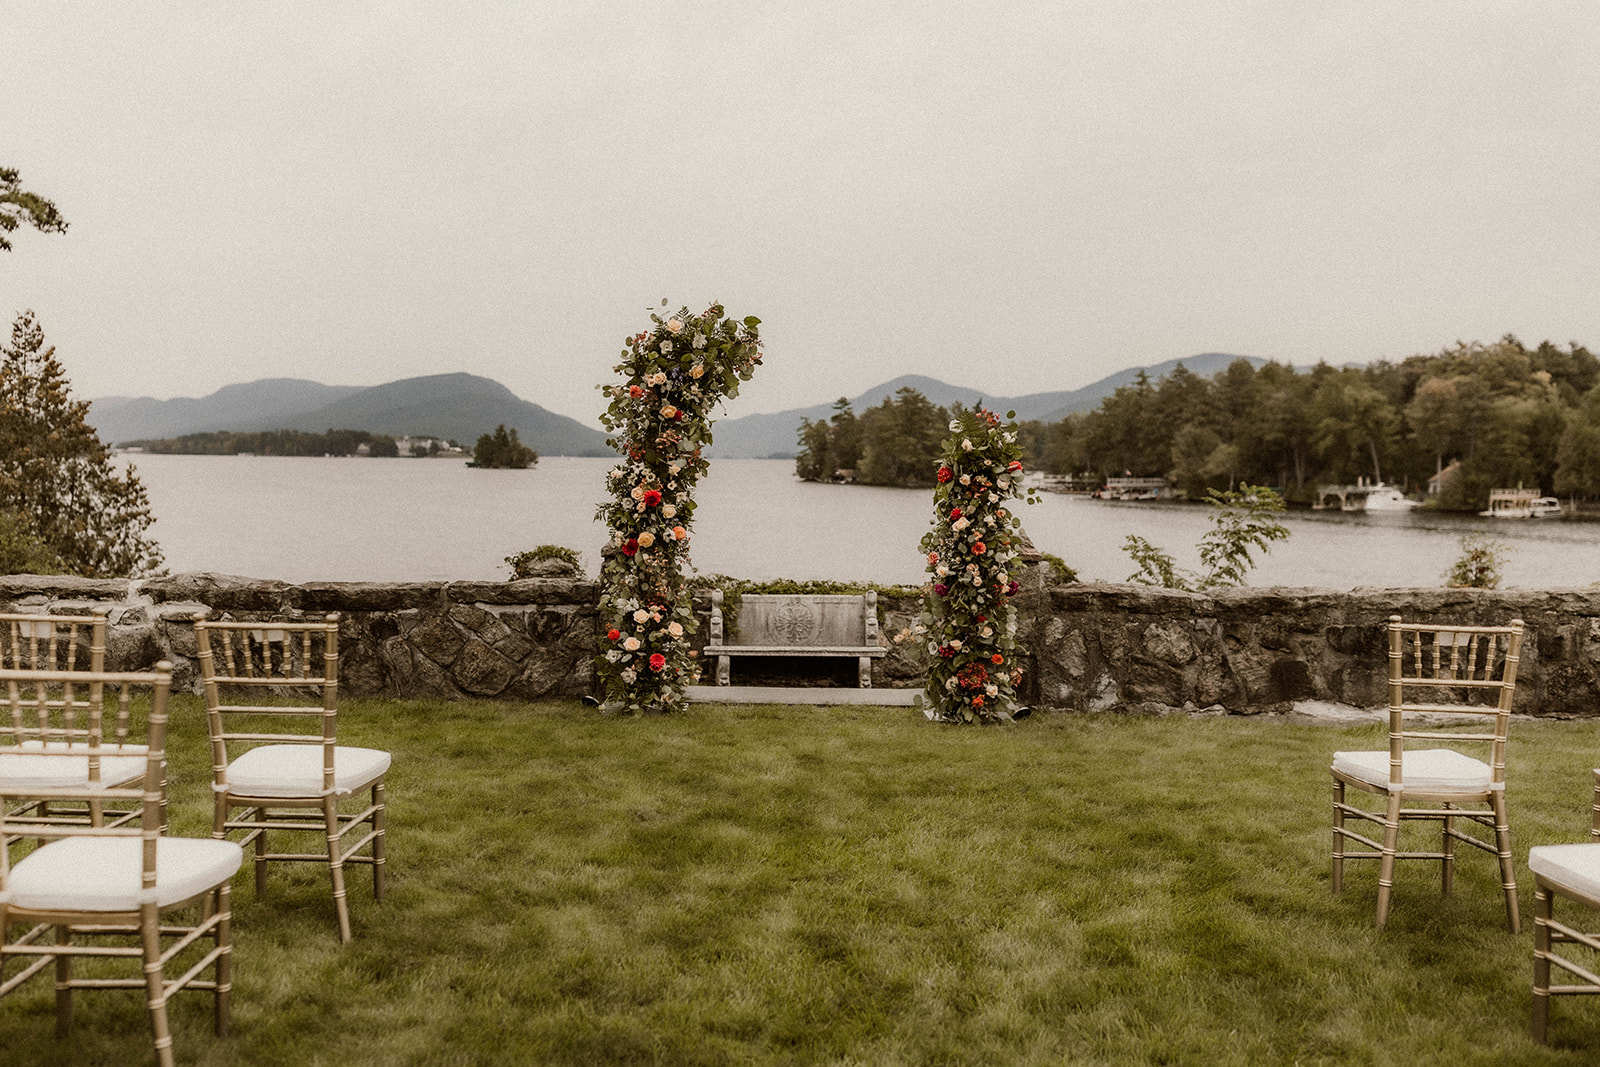 Elena and Ben share a tender moment against the backdrop of Melody Manor Resort's scenic vistas.